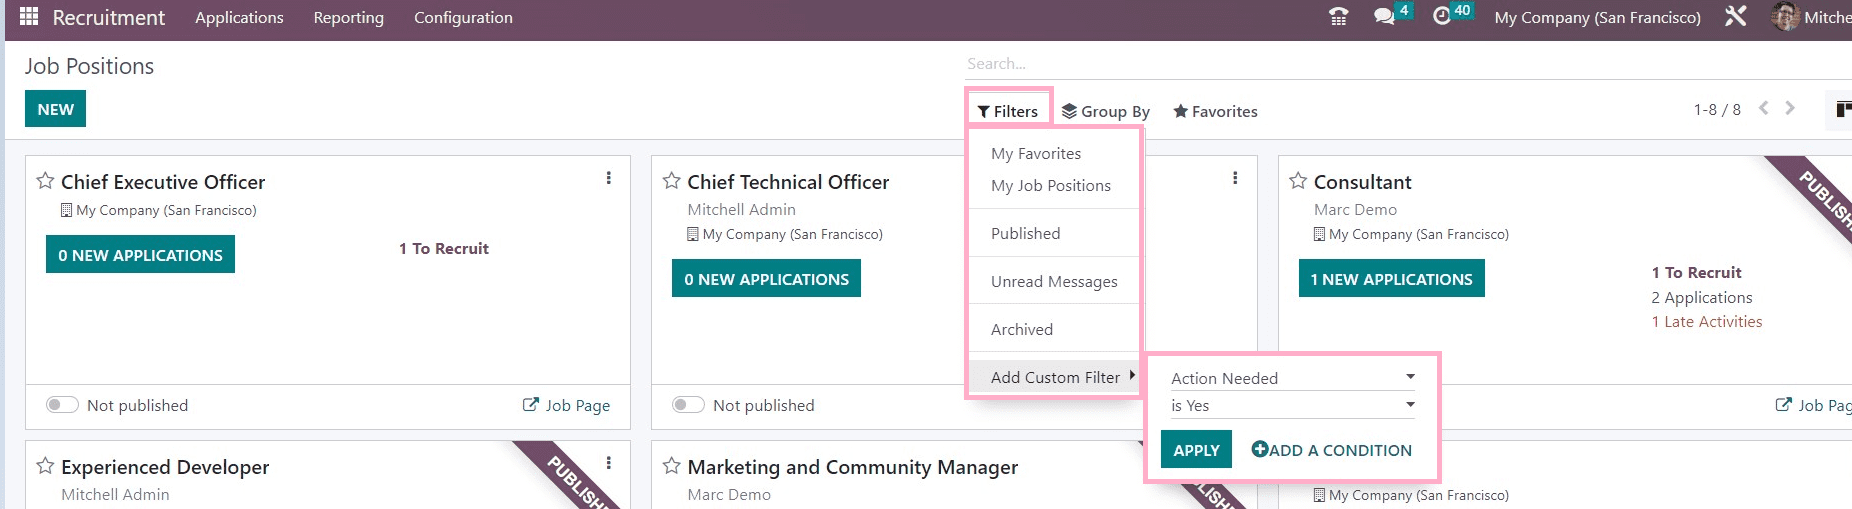 An Overview of Menu Options Available in the Odoo 16 Recruitment App-cybrosys